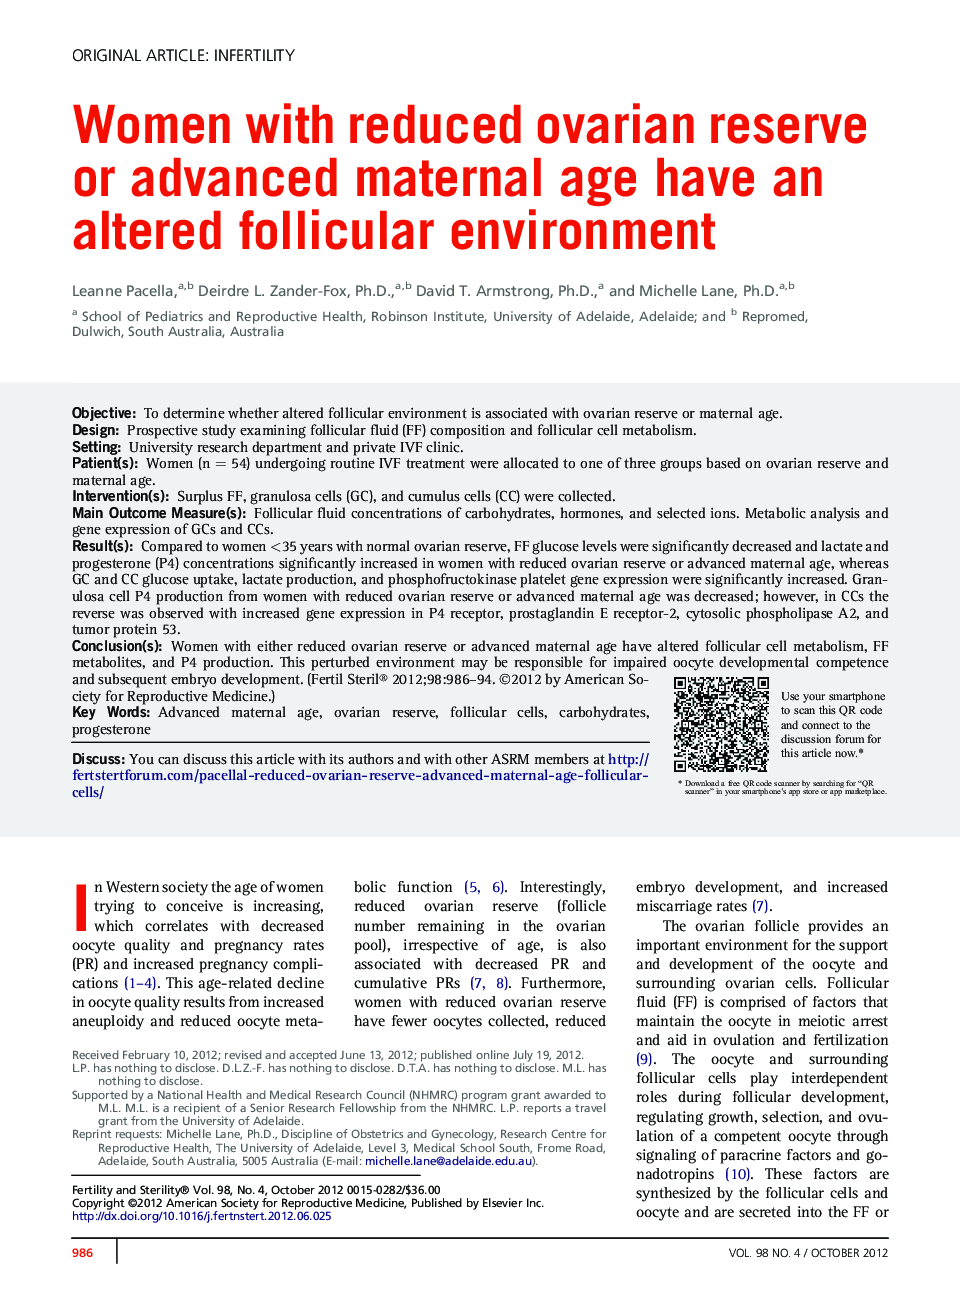 Women with reduced ovarian reserve or advanced maternal age have an altered follicular environment